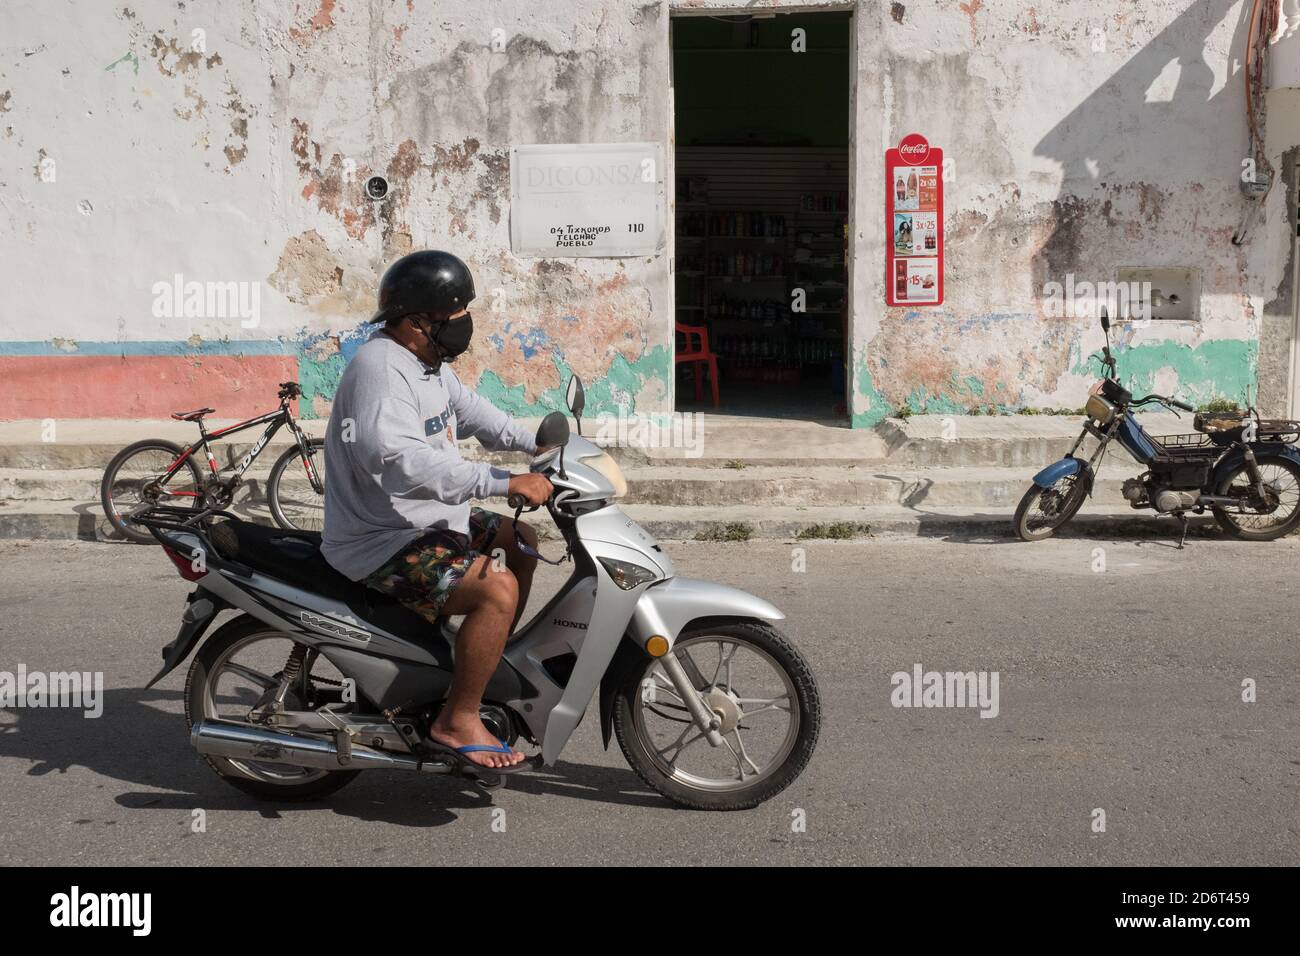 Daily life during the Covid-19 pandemic, town of Telchac, Yucatan, Mexico Stock Photo